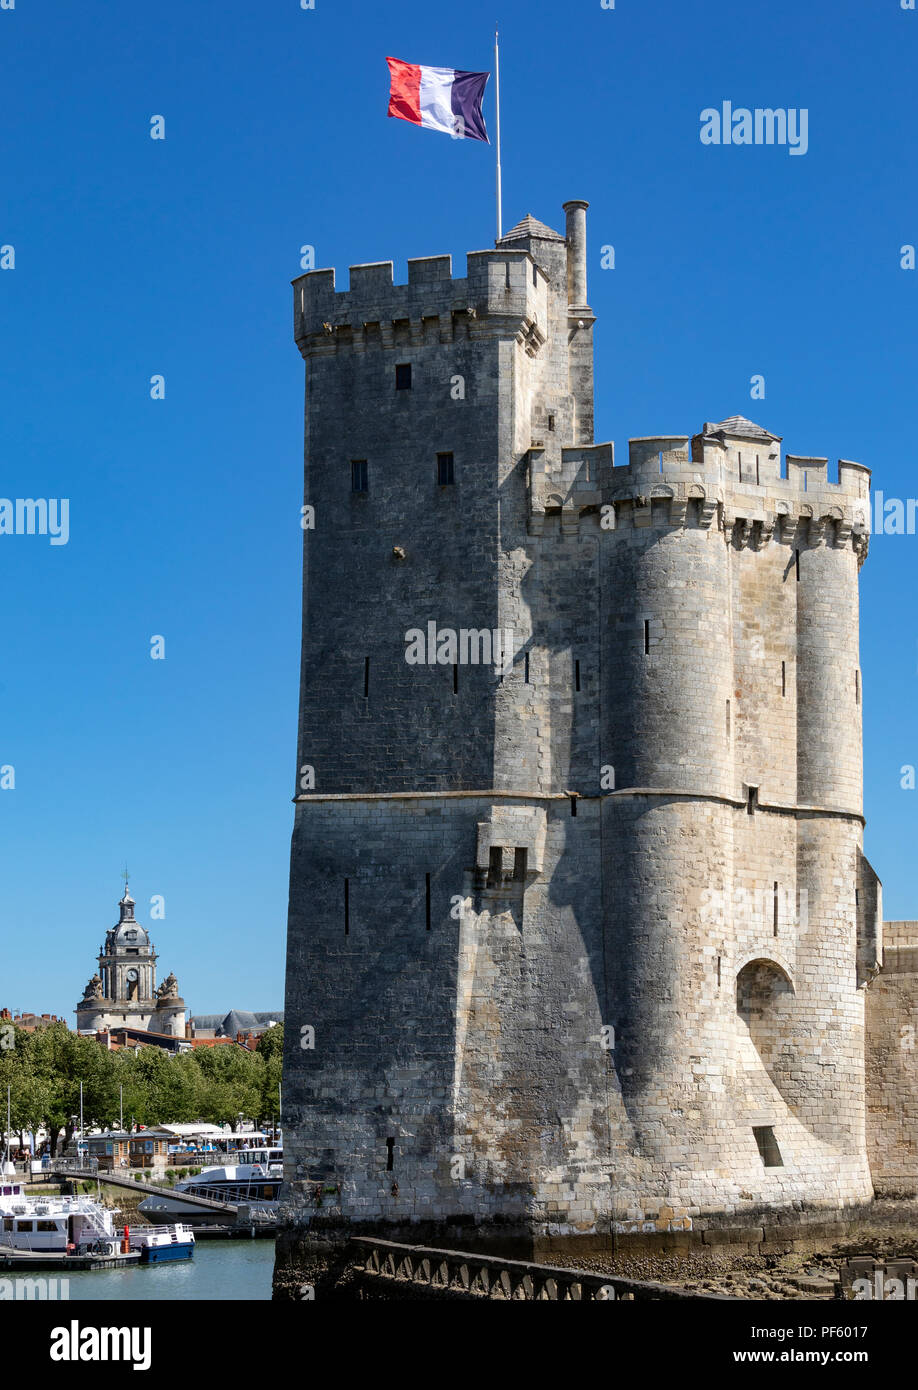 Tour de la Chaine in the Vieux Port in La Rochelle on the coast of the Poitou-Charentes region of France. This landmarks date from the 11th century. Stock Photo